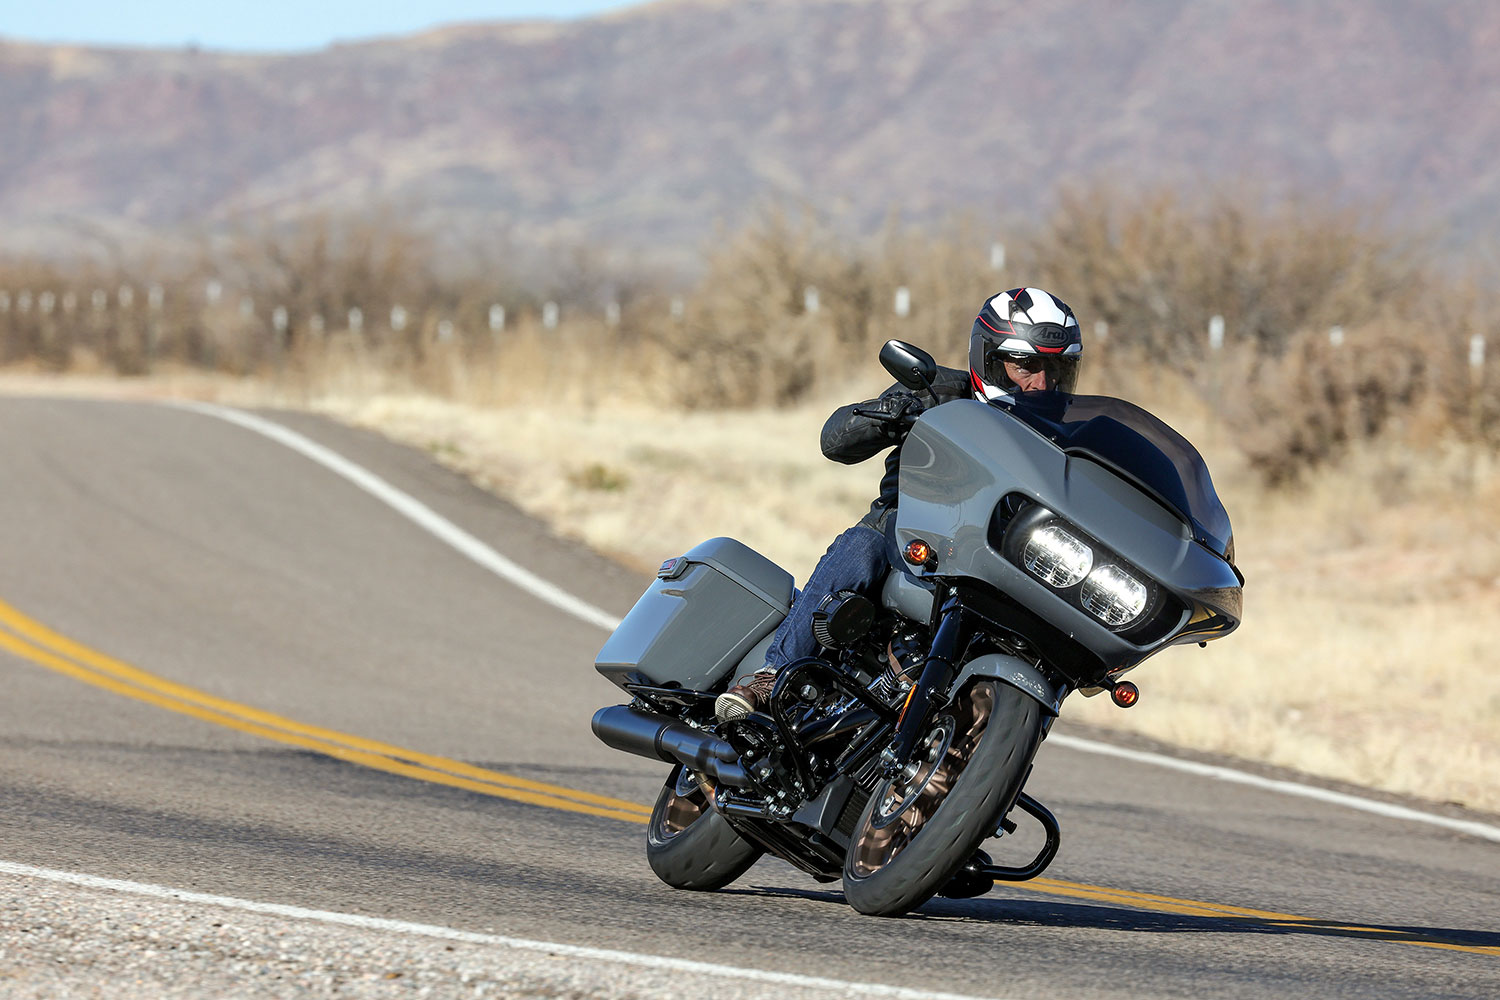 2022 Harley-Davidson Street Glide ST & Road Glide ST Are Incredible